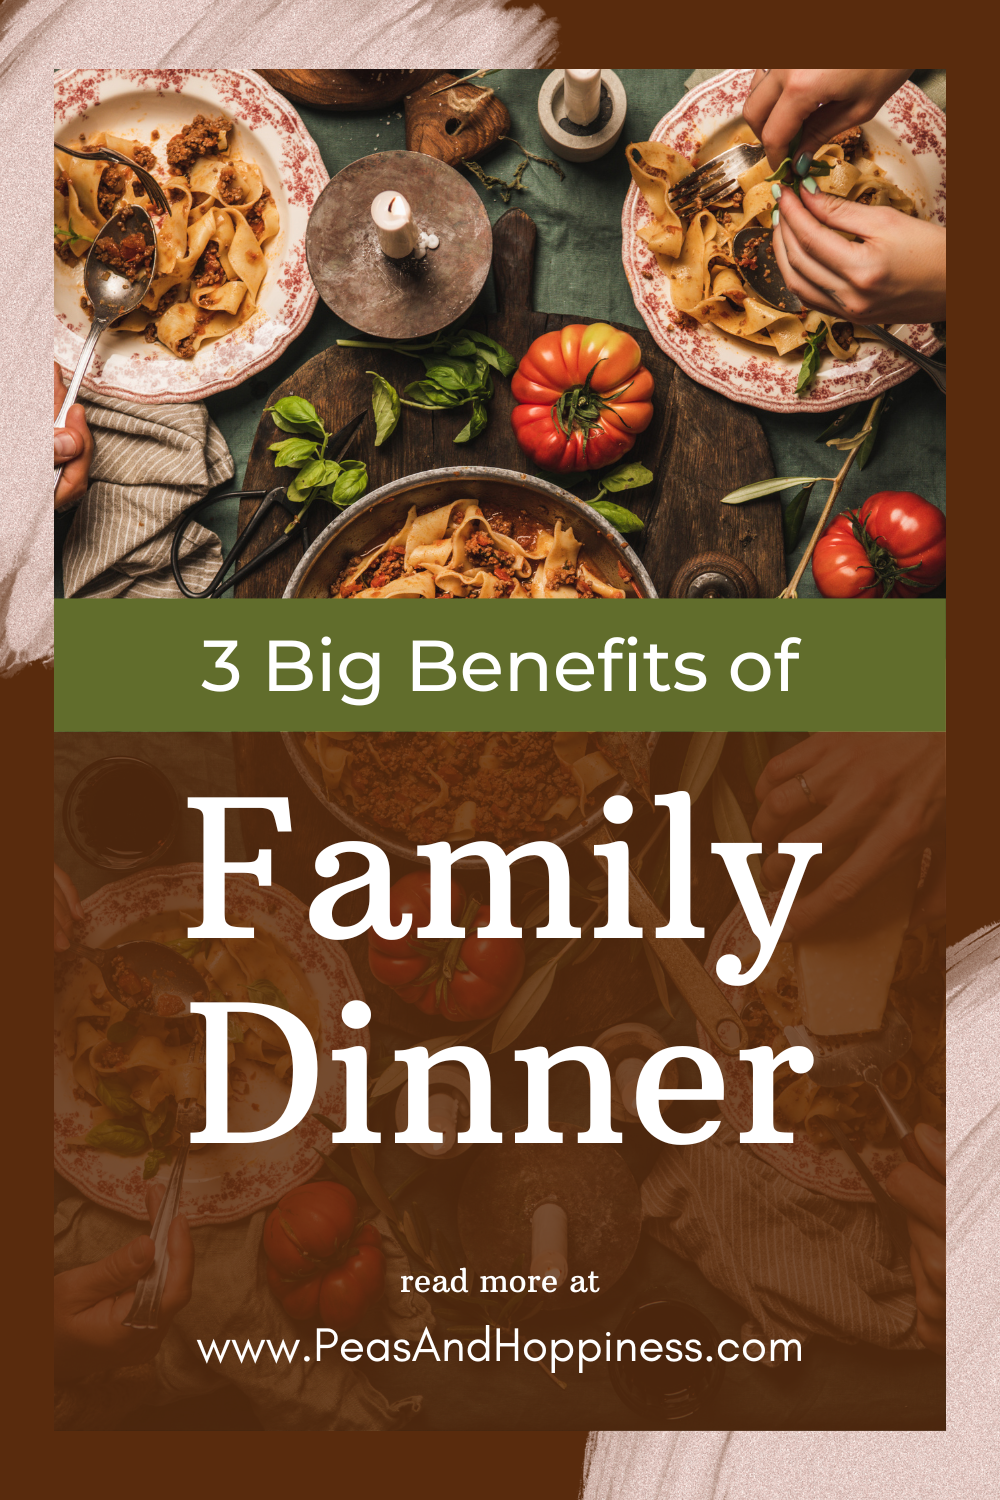 The benefits of having mealtime as a family